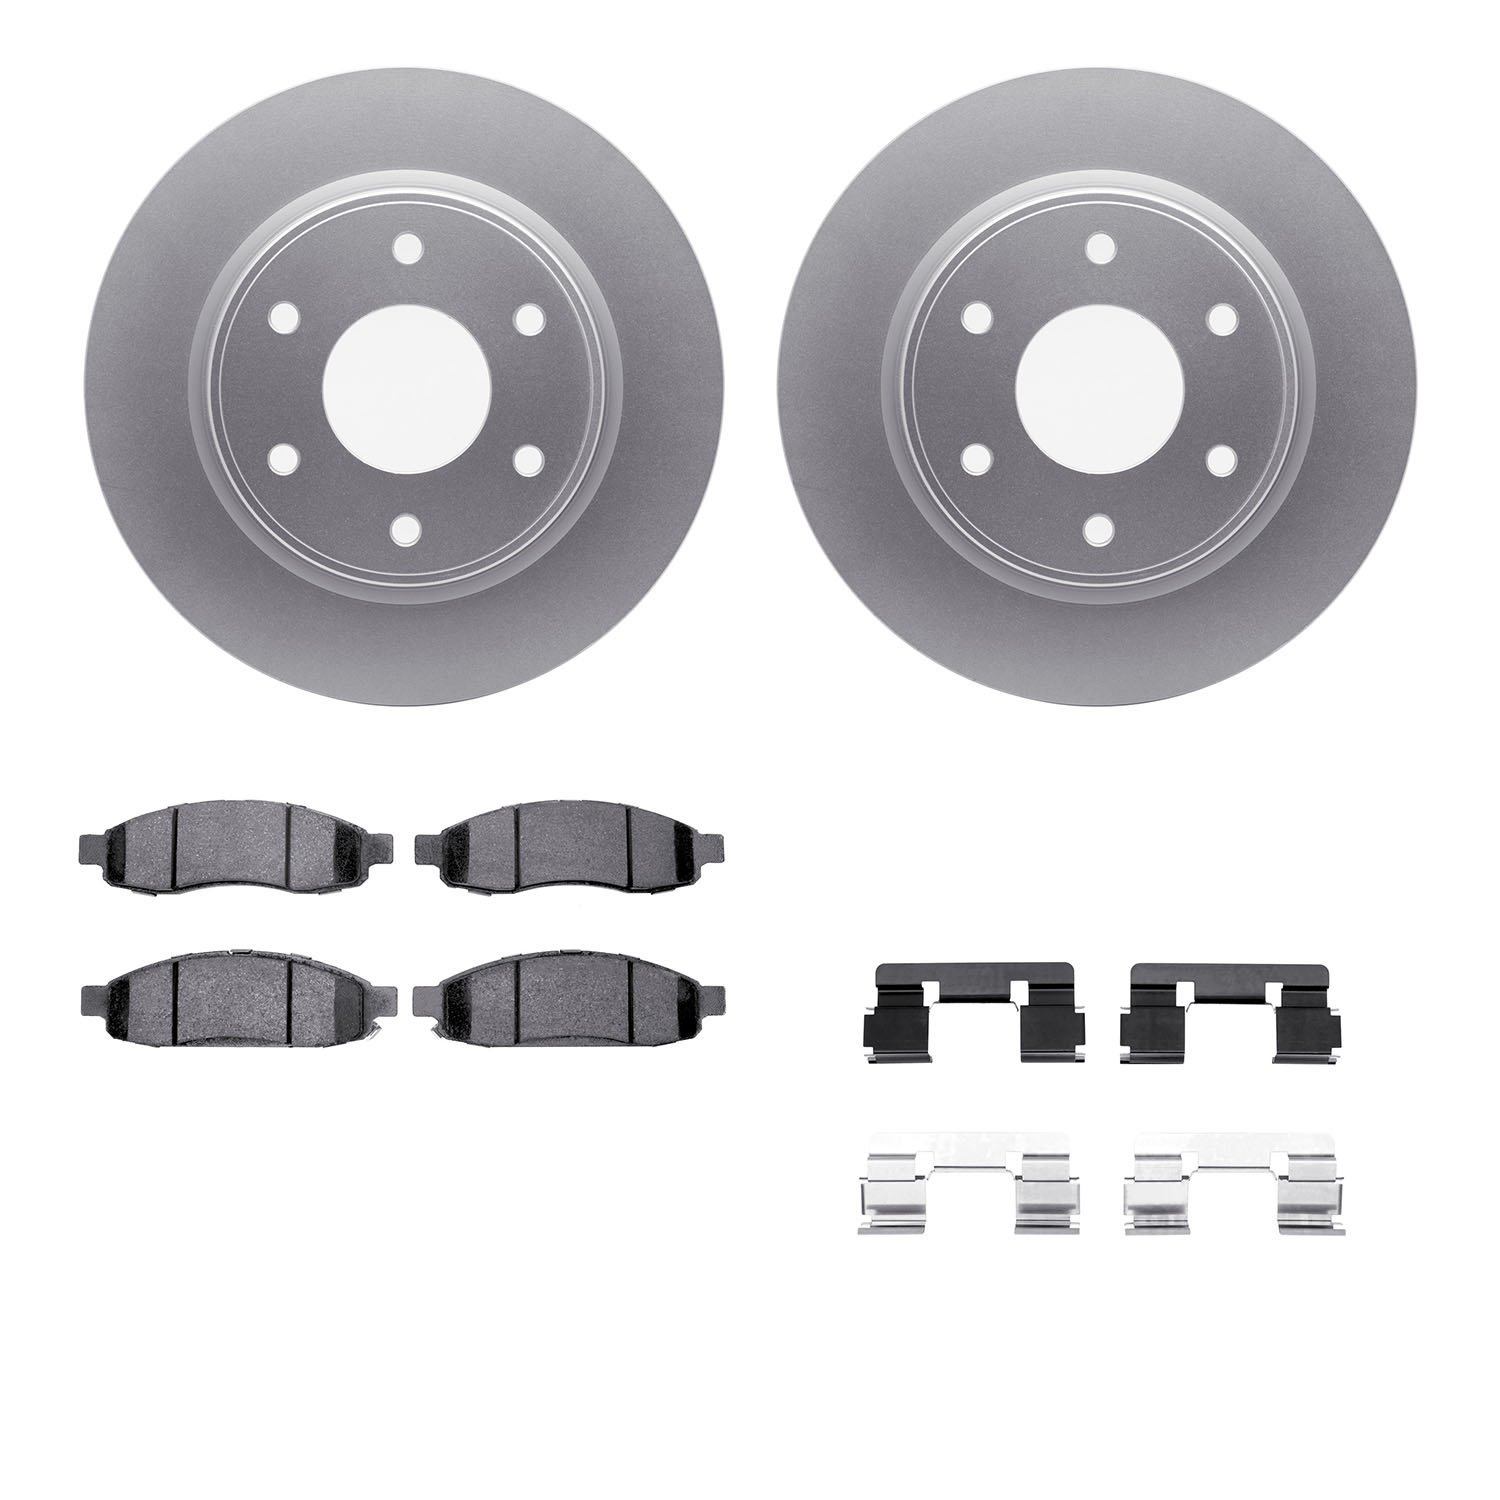 4412-67003 Geospec Brake Rotors with Ultimate-Duty Brake Pads & Hardware, 2005-2007 Infiniti/Nissan, Position: Front